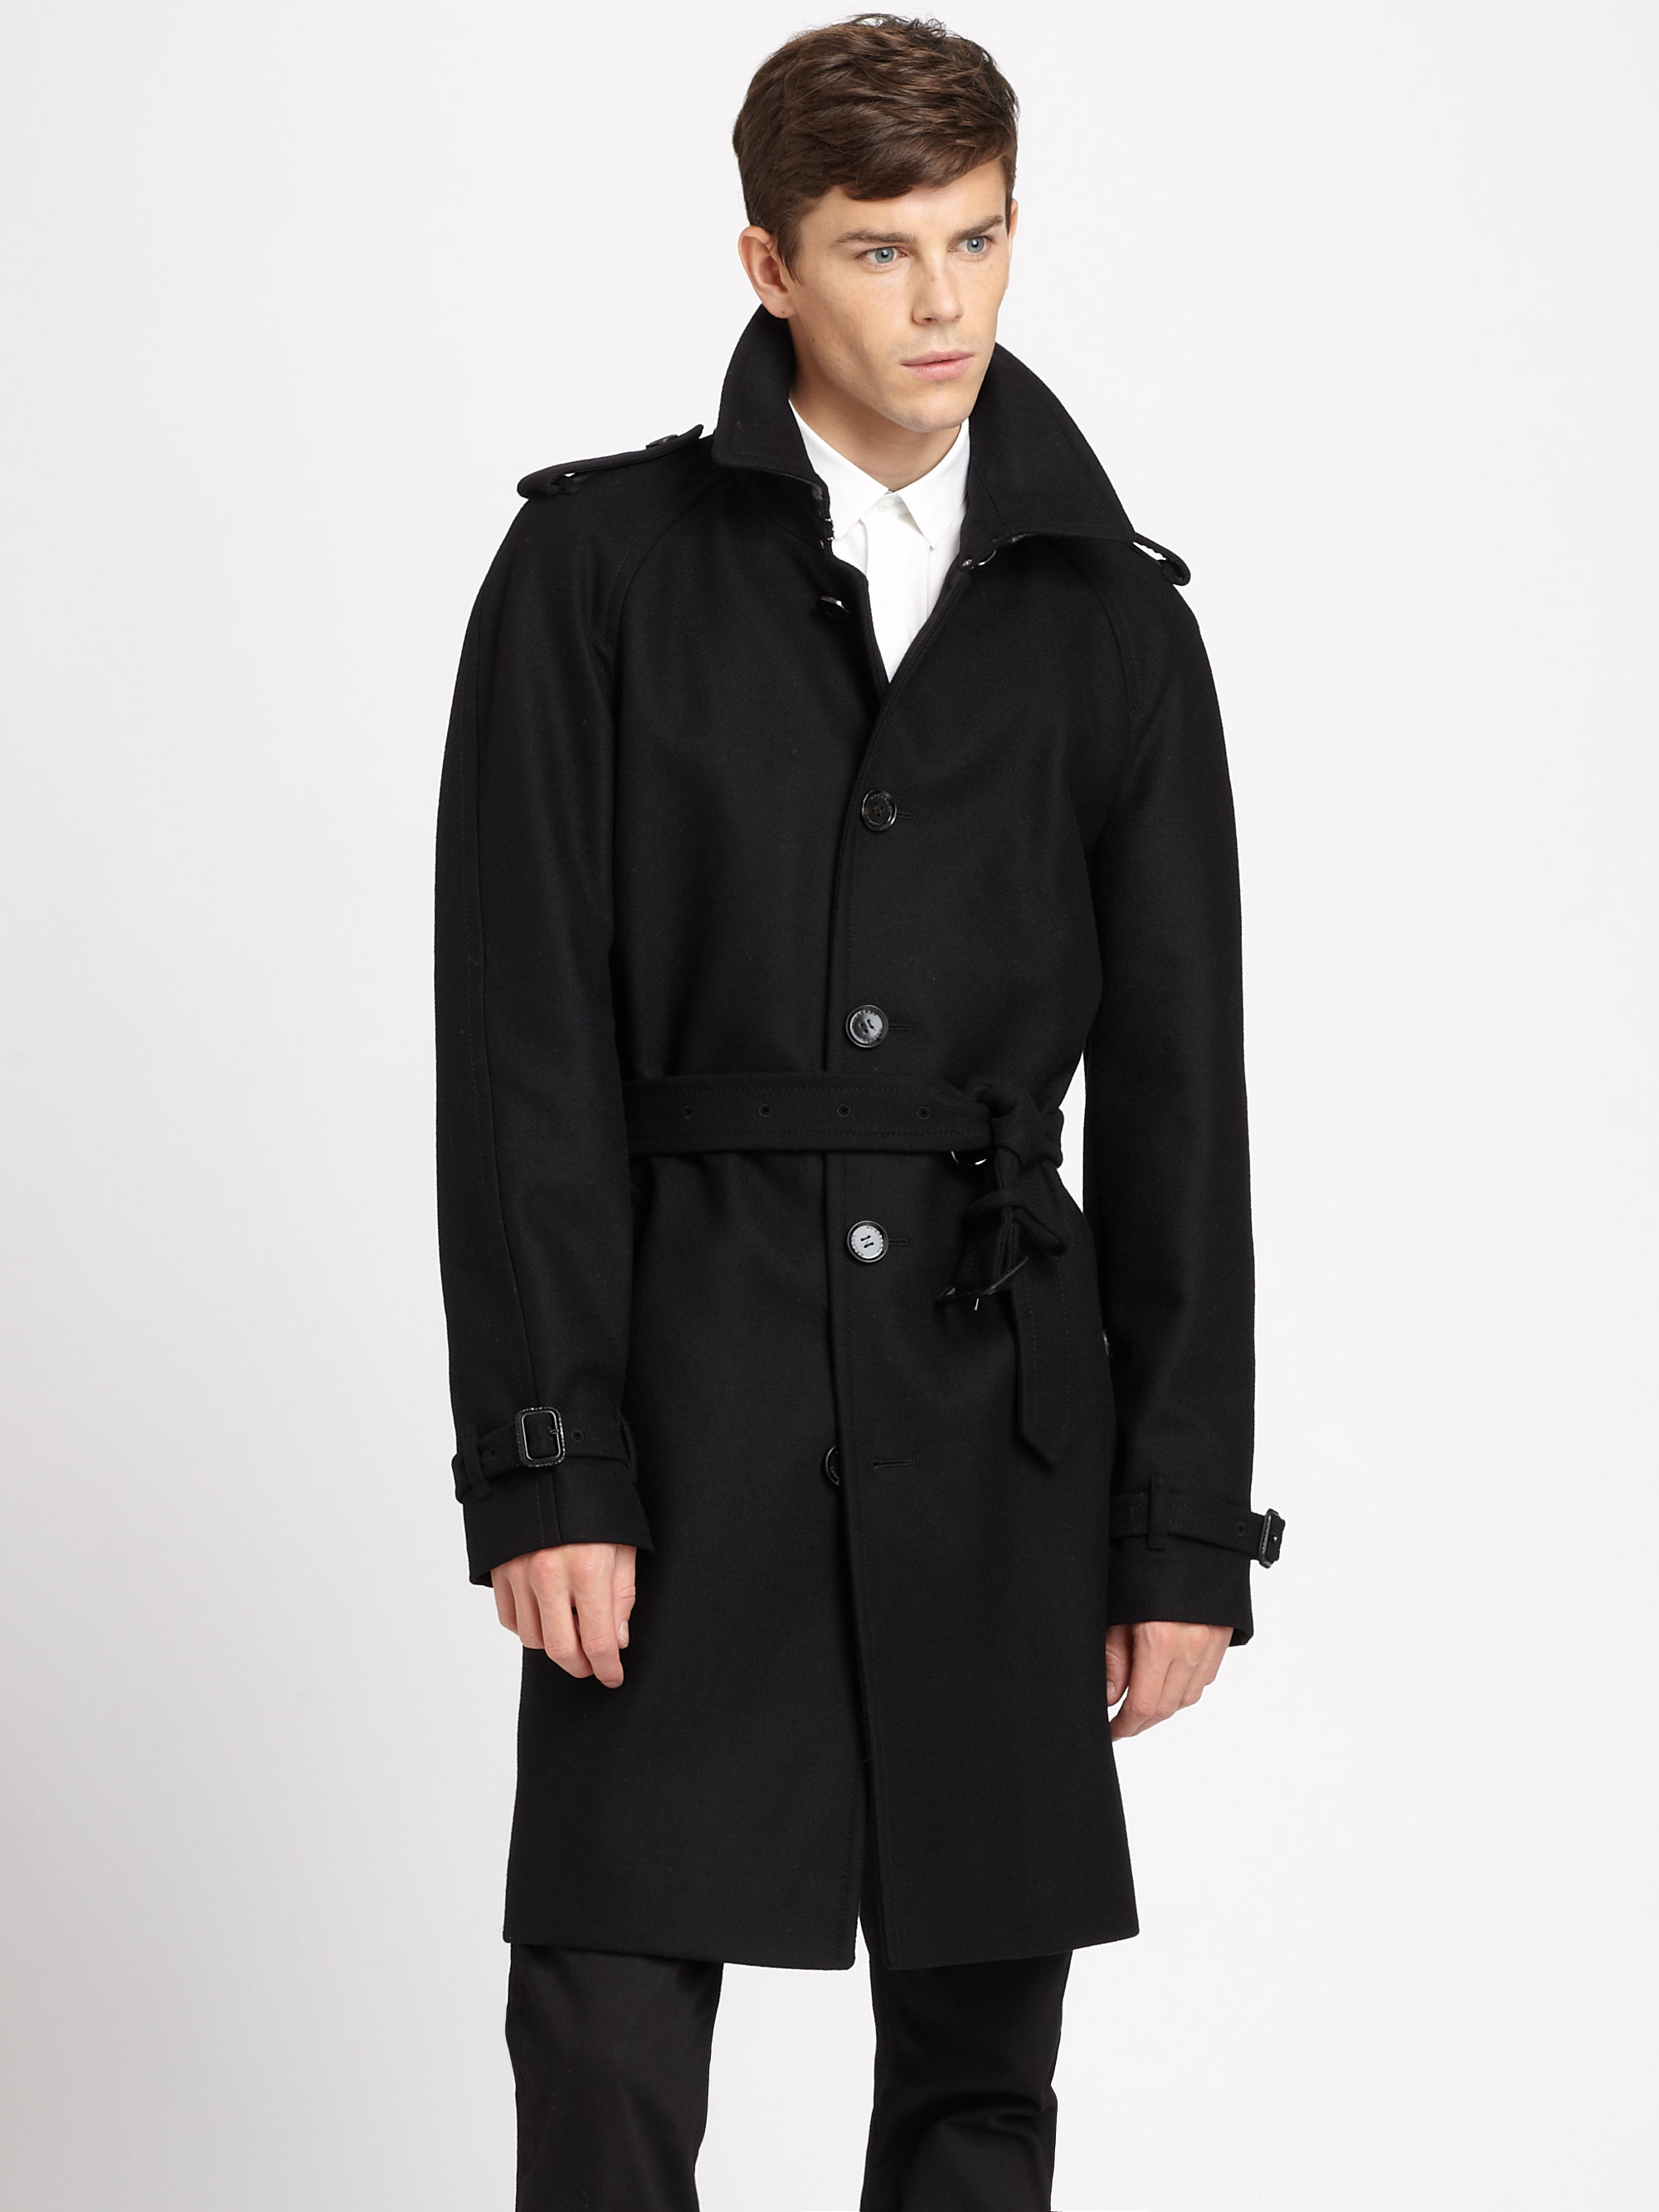 Actualizar 76+ imagen burberry mens single breasted trench coat ...